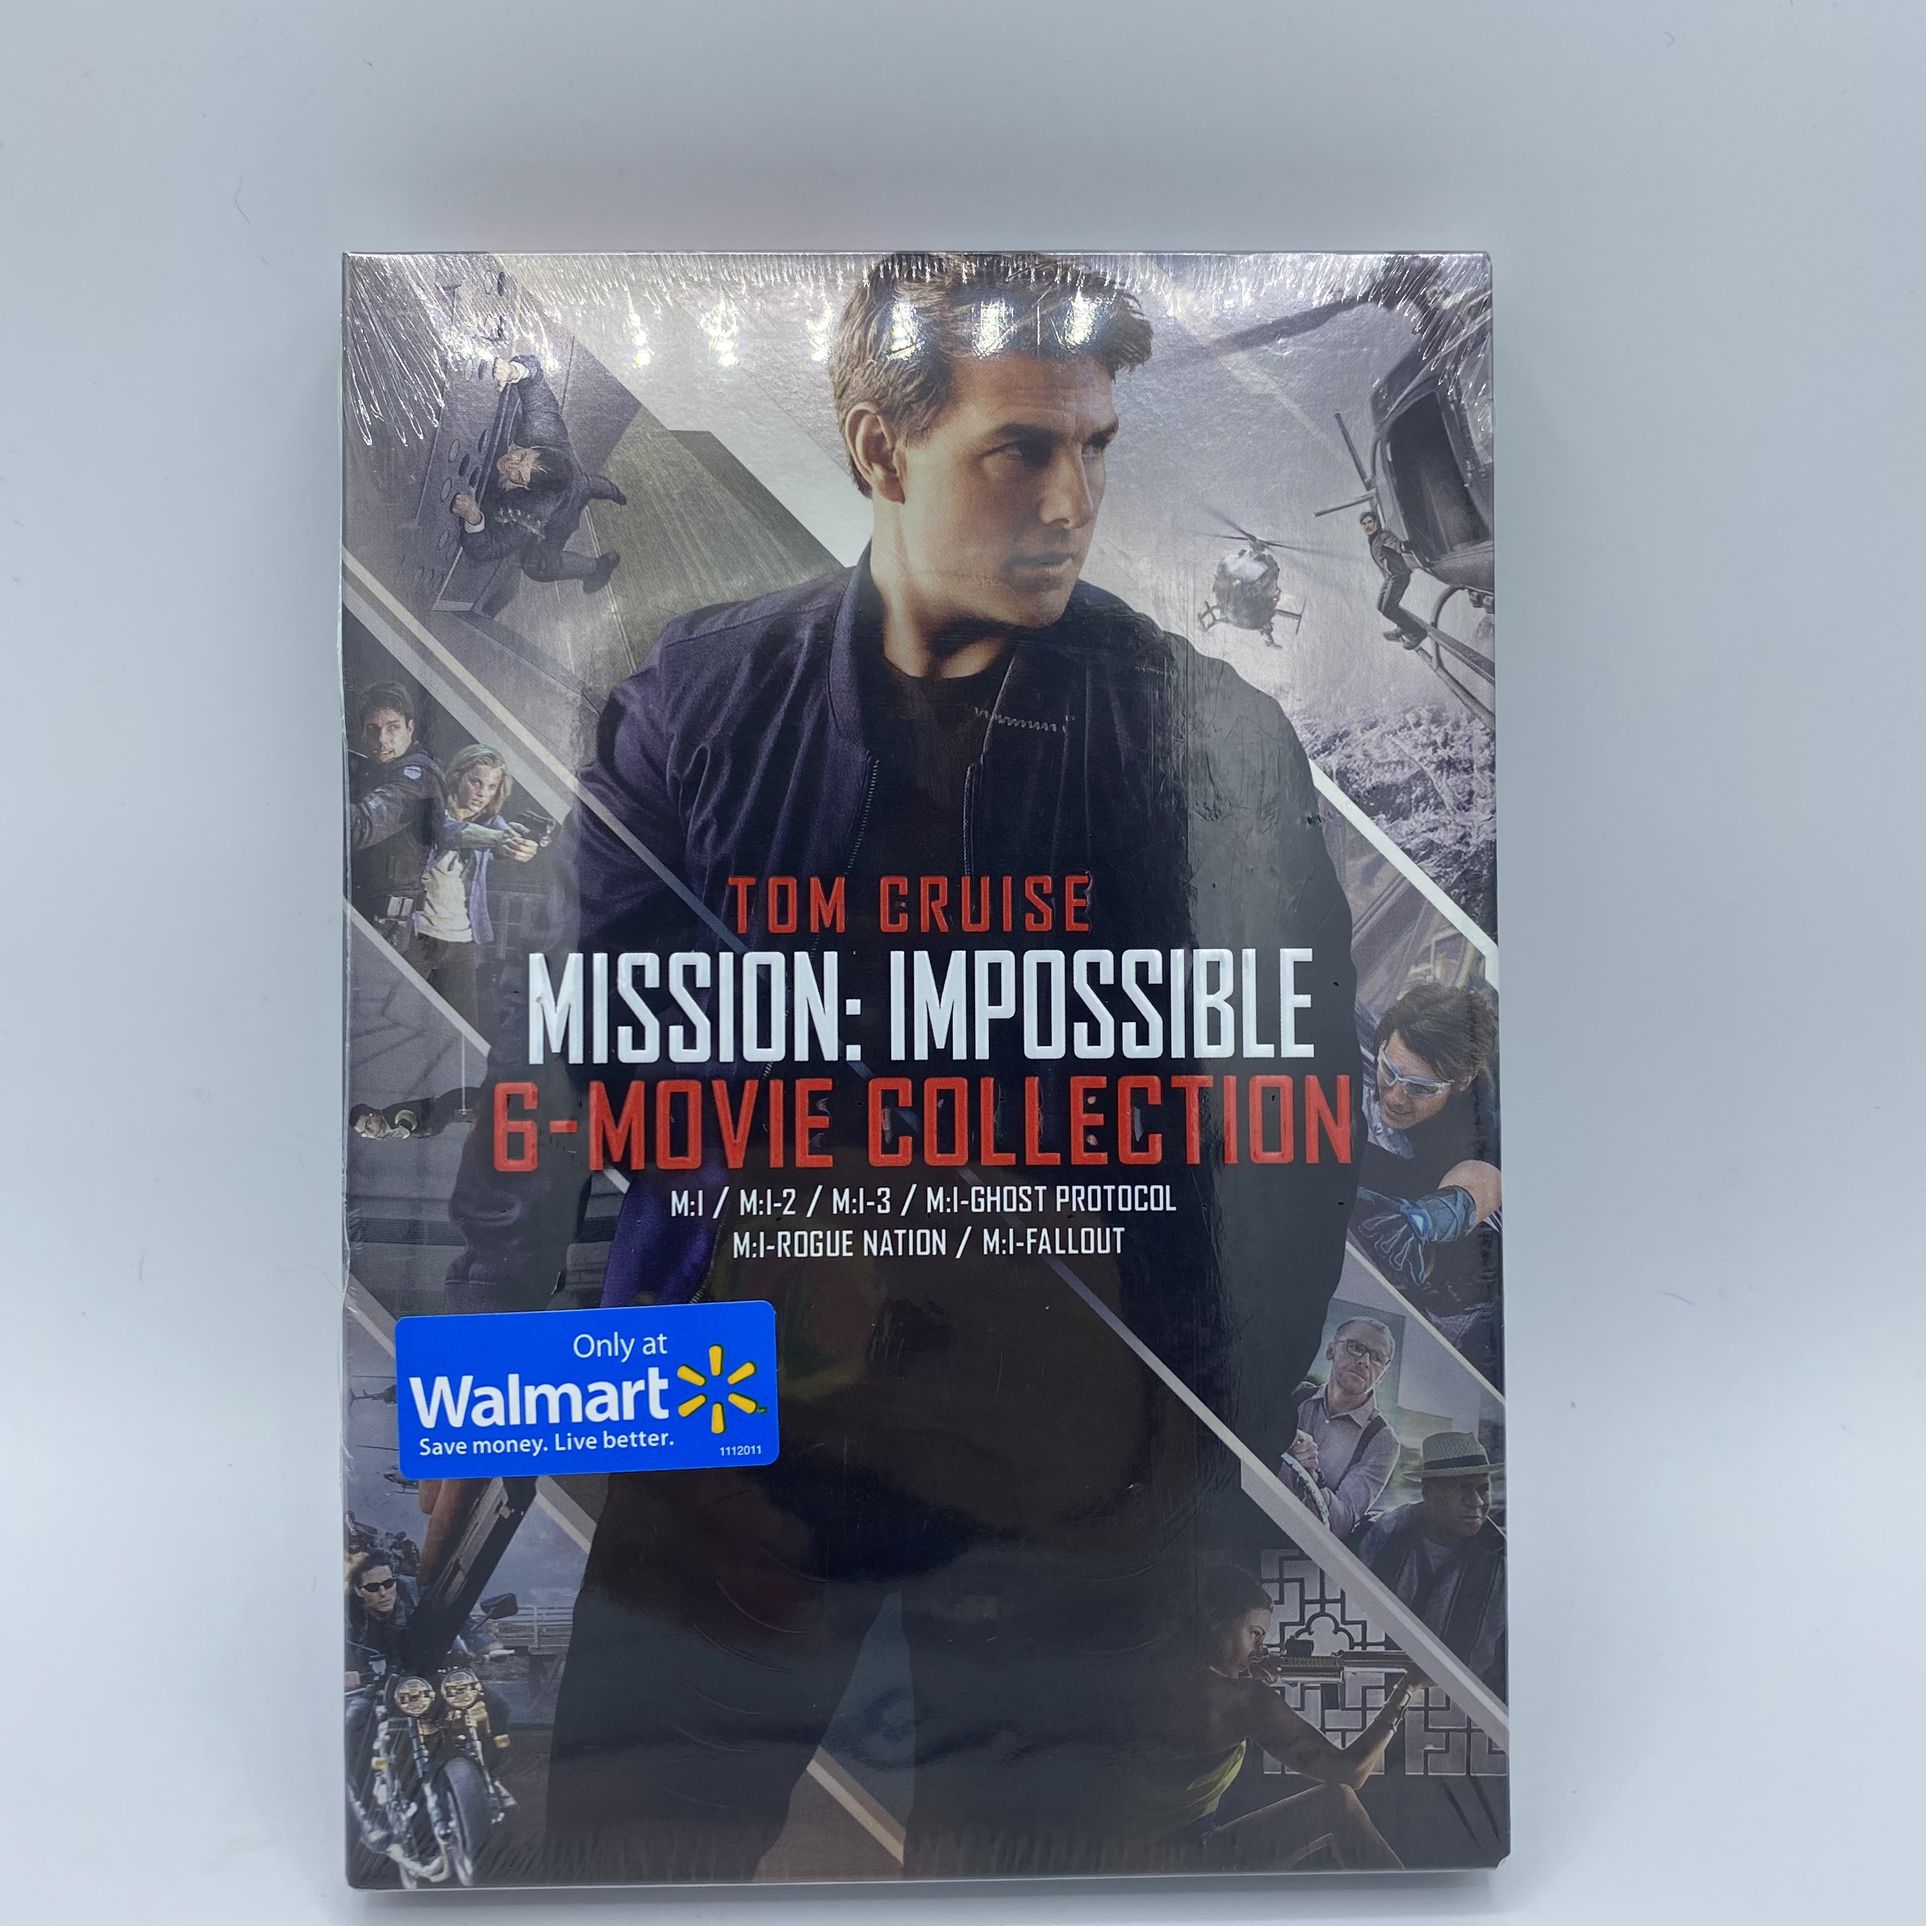 Mission Impossible 6-Movie Collection DVD Box Set Brand New Factory Sealed 